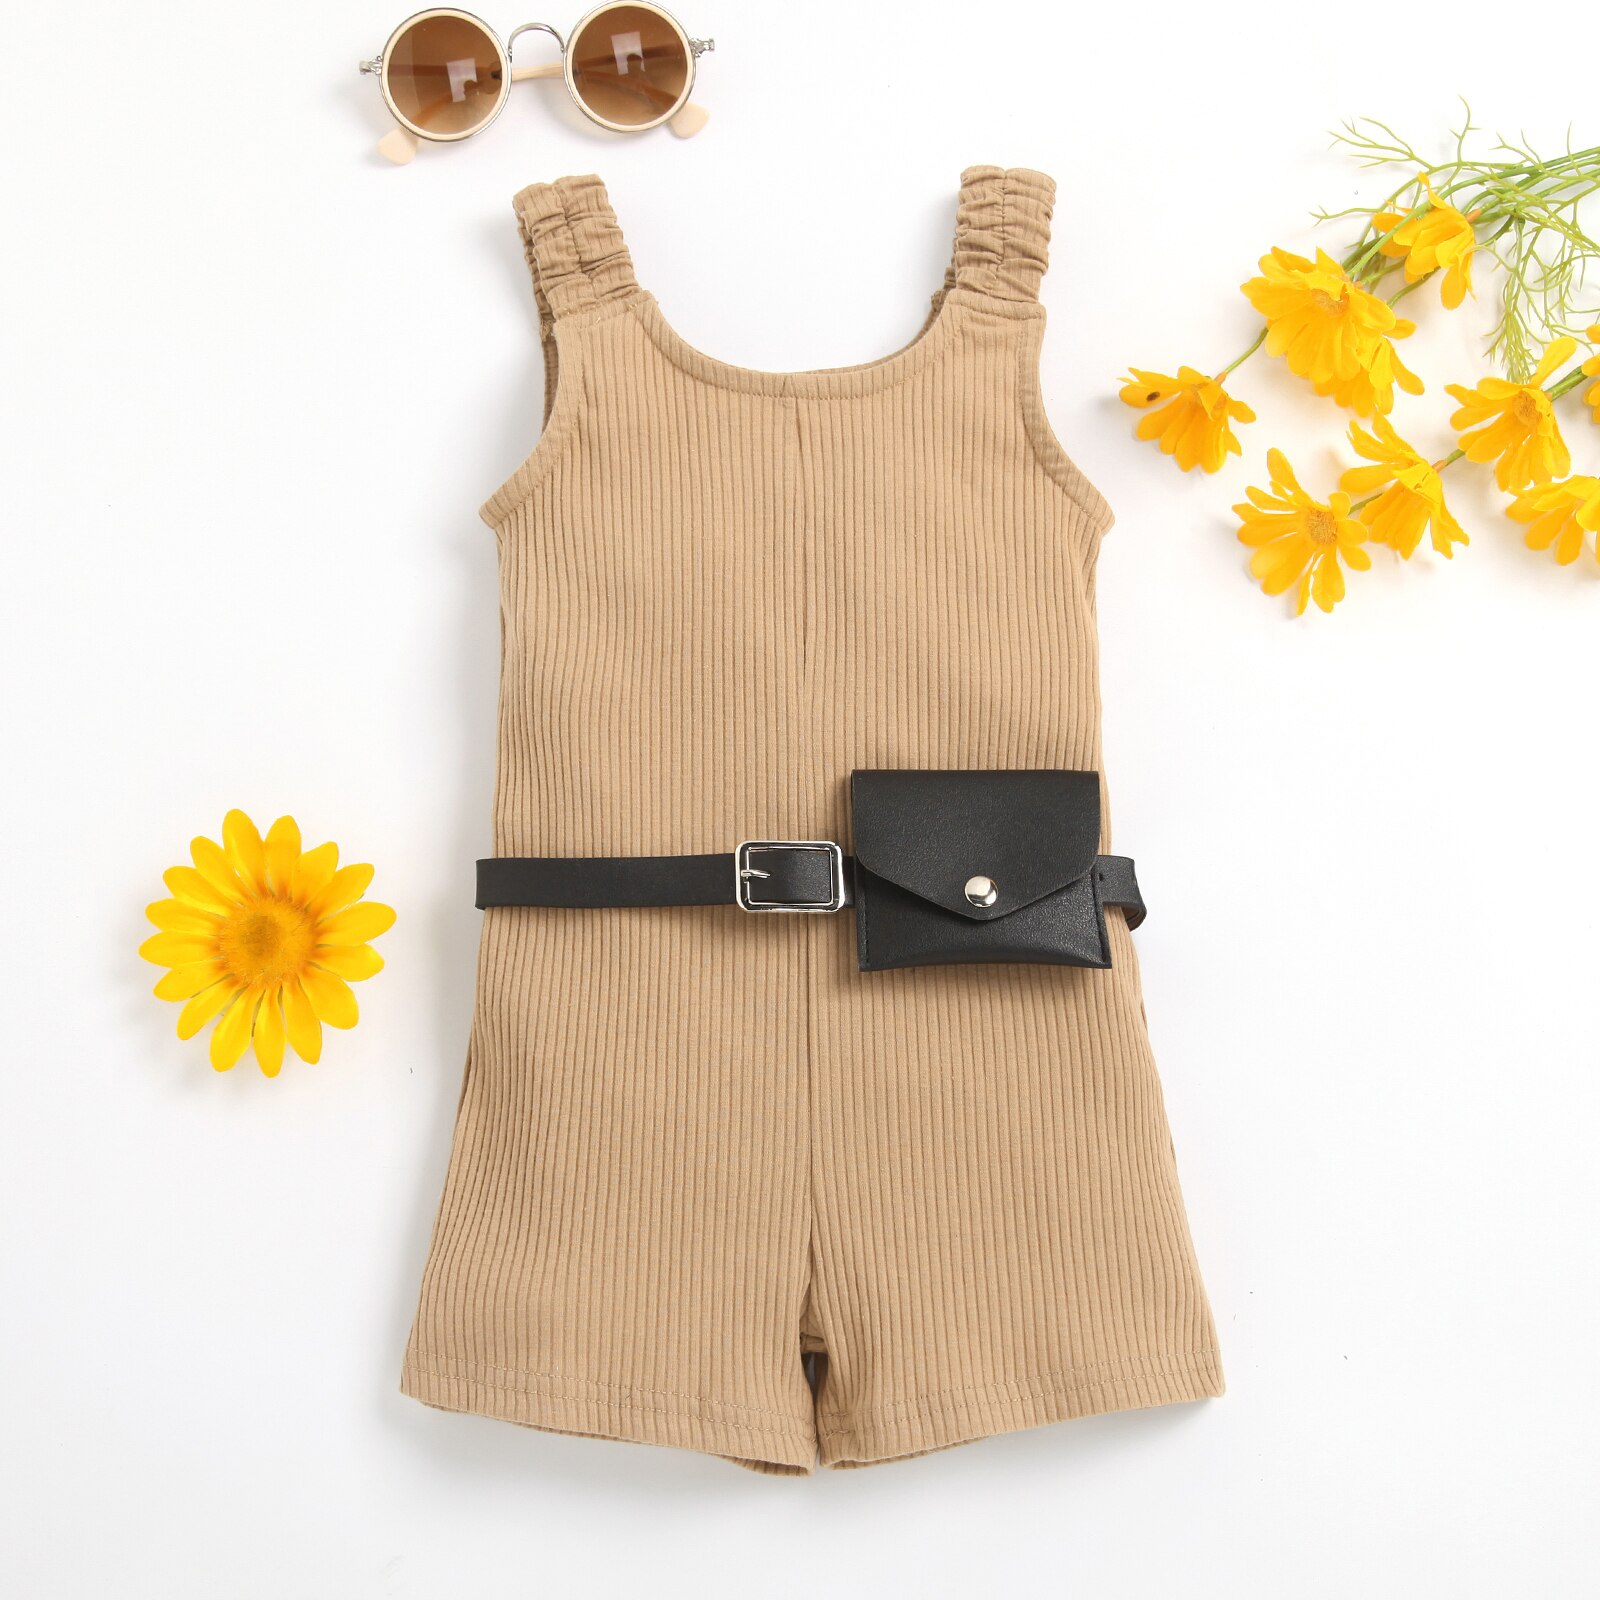 Infant-Kids-Baby-Girl-s-Jumpsuit-Set-Wide-Strap-Sleeveless-Ribbed-Short-Playsuit-Ribbed-Jumpsuit-Waist-3